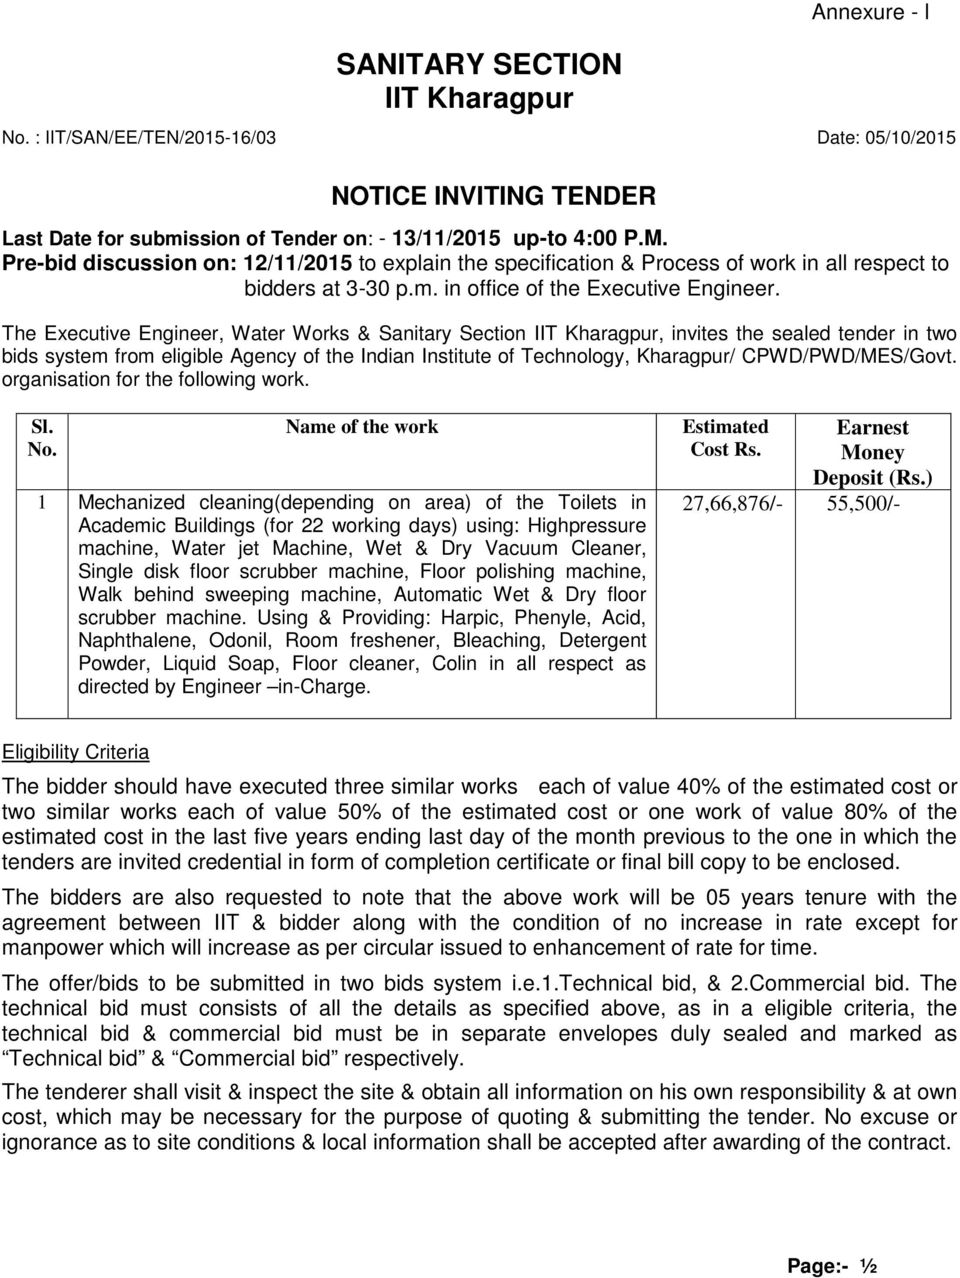 The Executive Engineer, Water Works & Sanitary Section IIT Kharagpur, invites the sealed tender in two bids system from eligible Agency of the Indian Institute of Technology, Kharagpur/